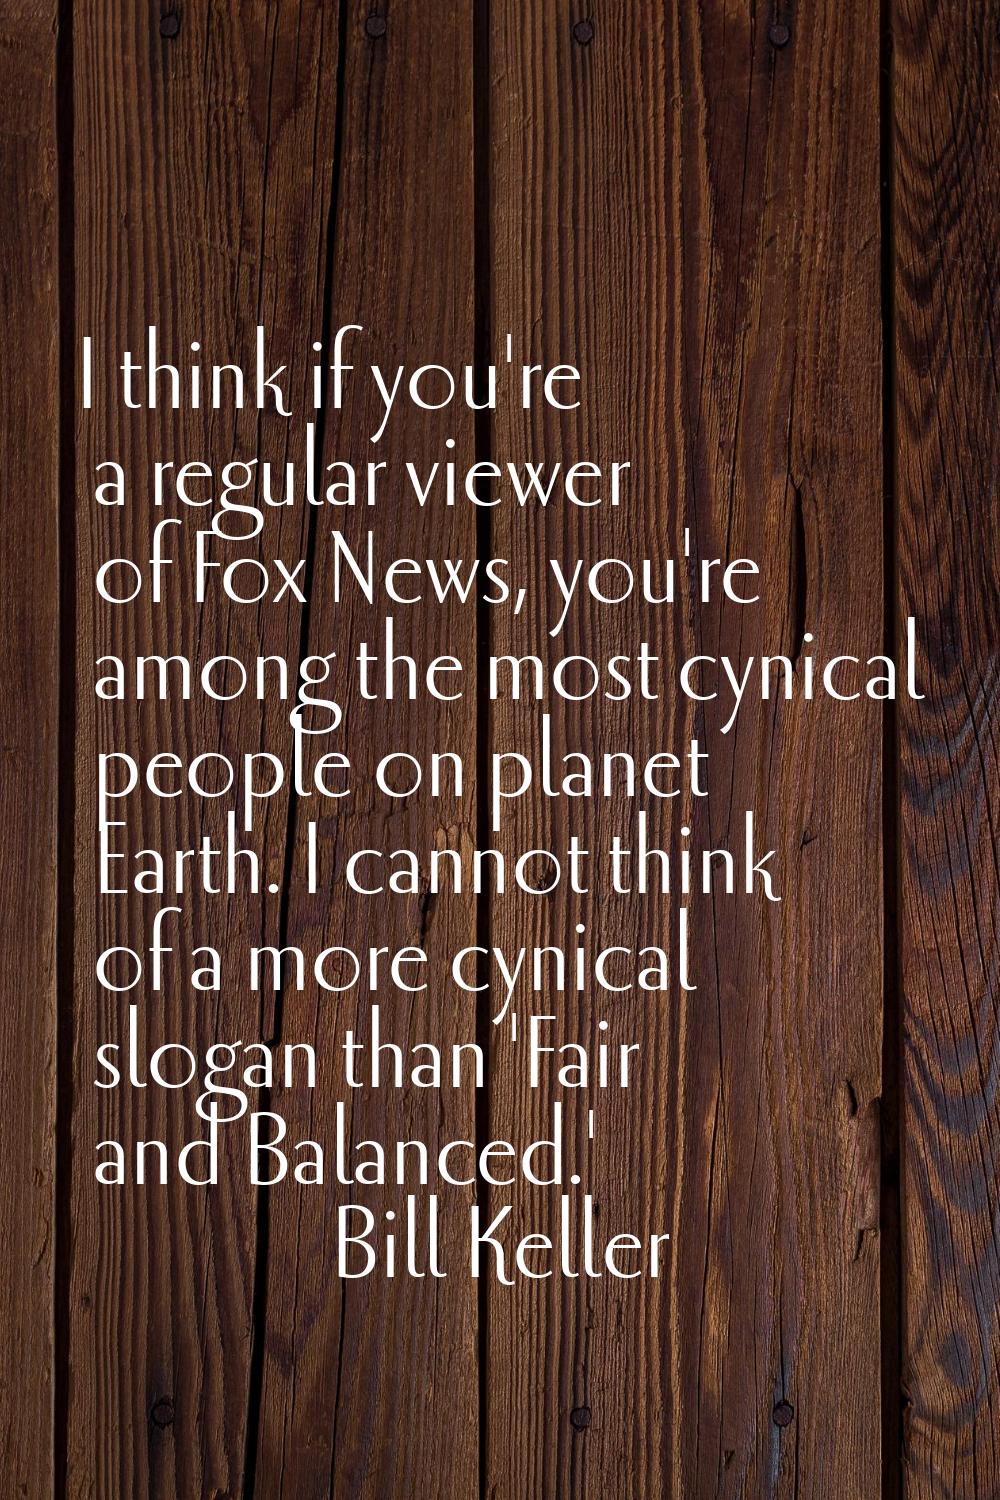 I think if you're a regular viewer of Fox News, you're among the most cynical people on planet Eart